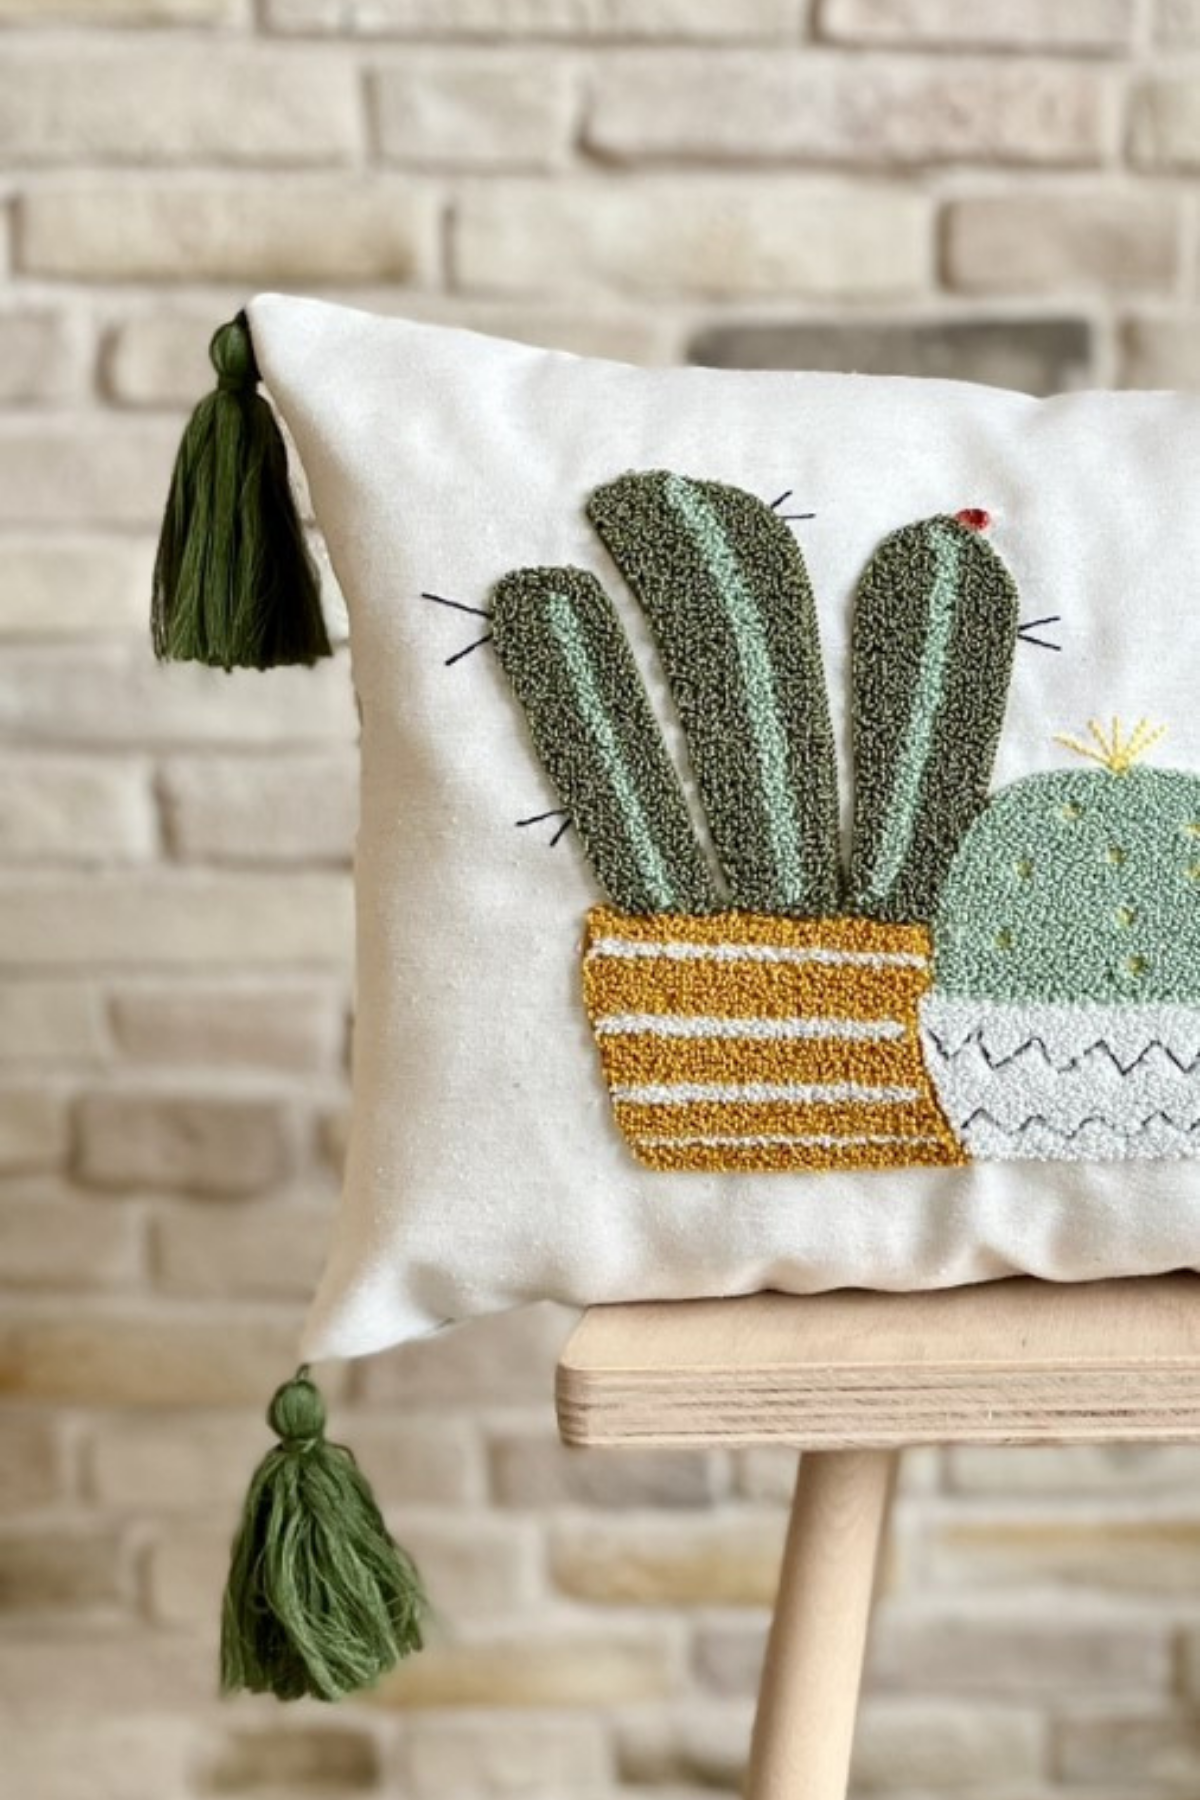 Punch Pillow Cover